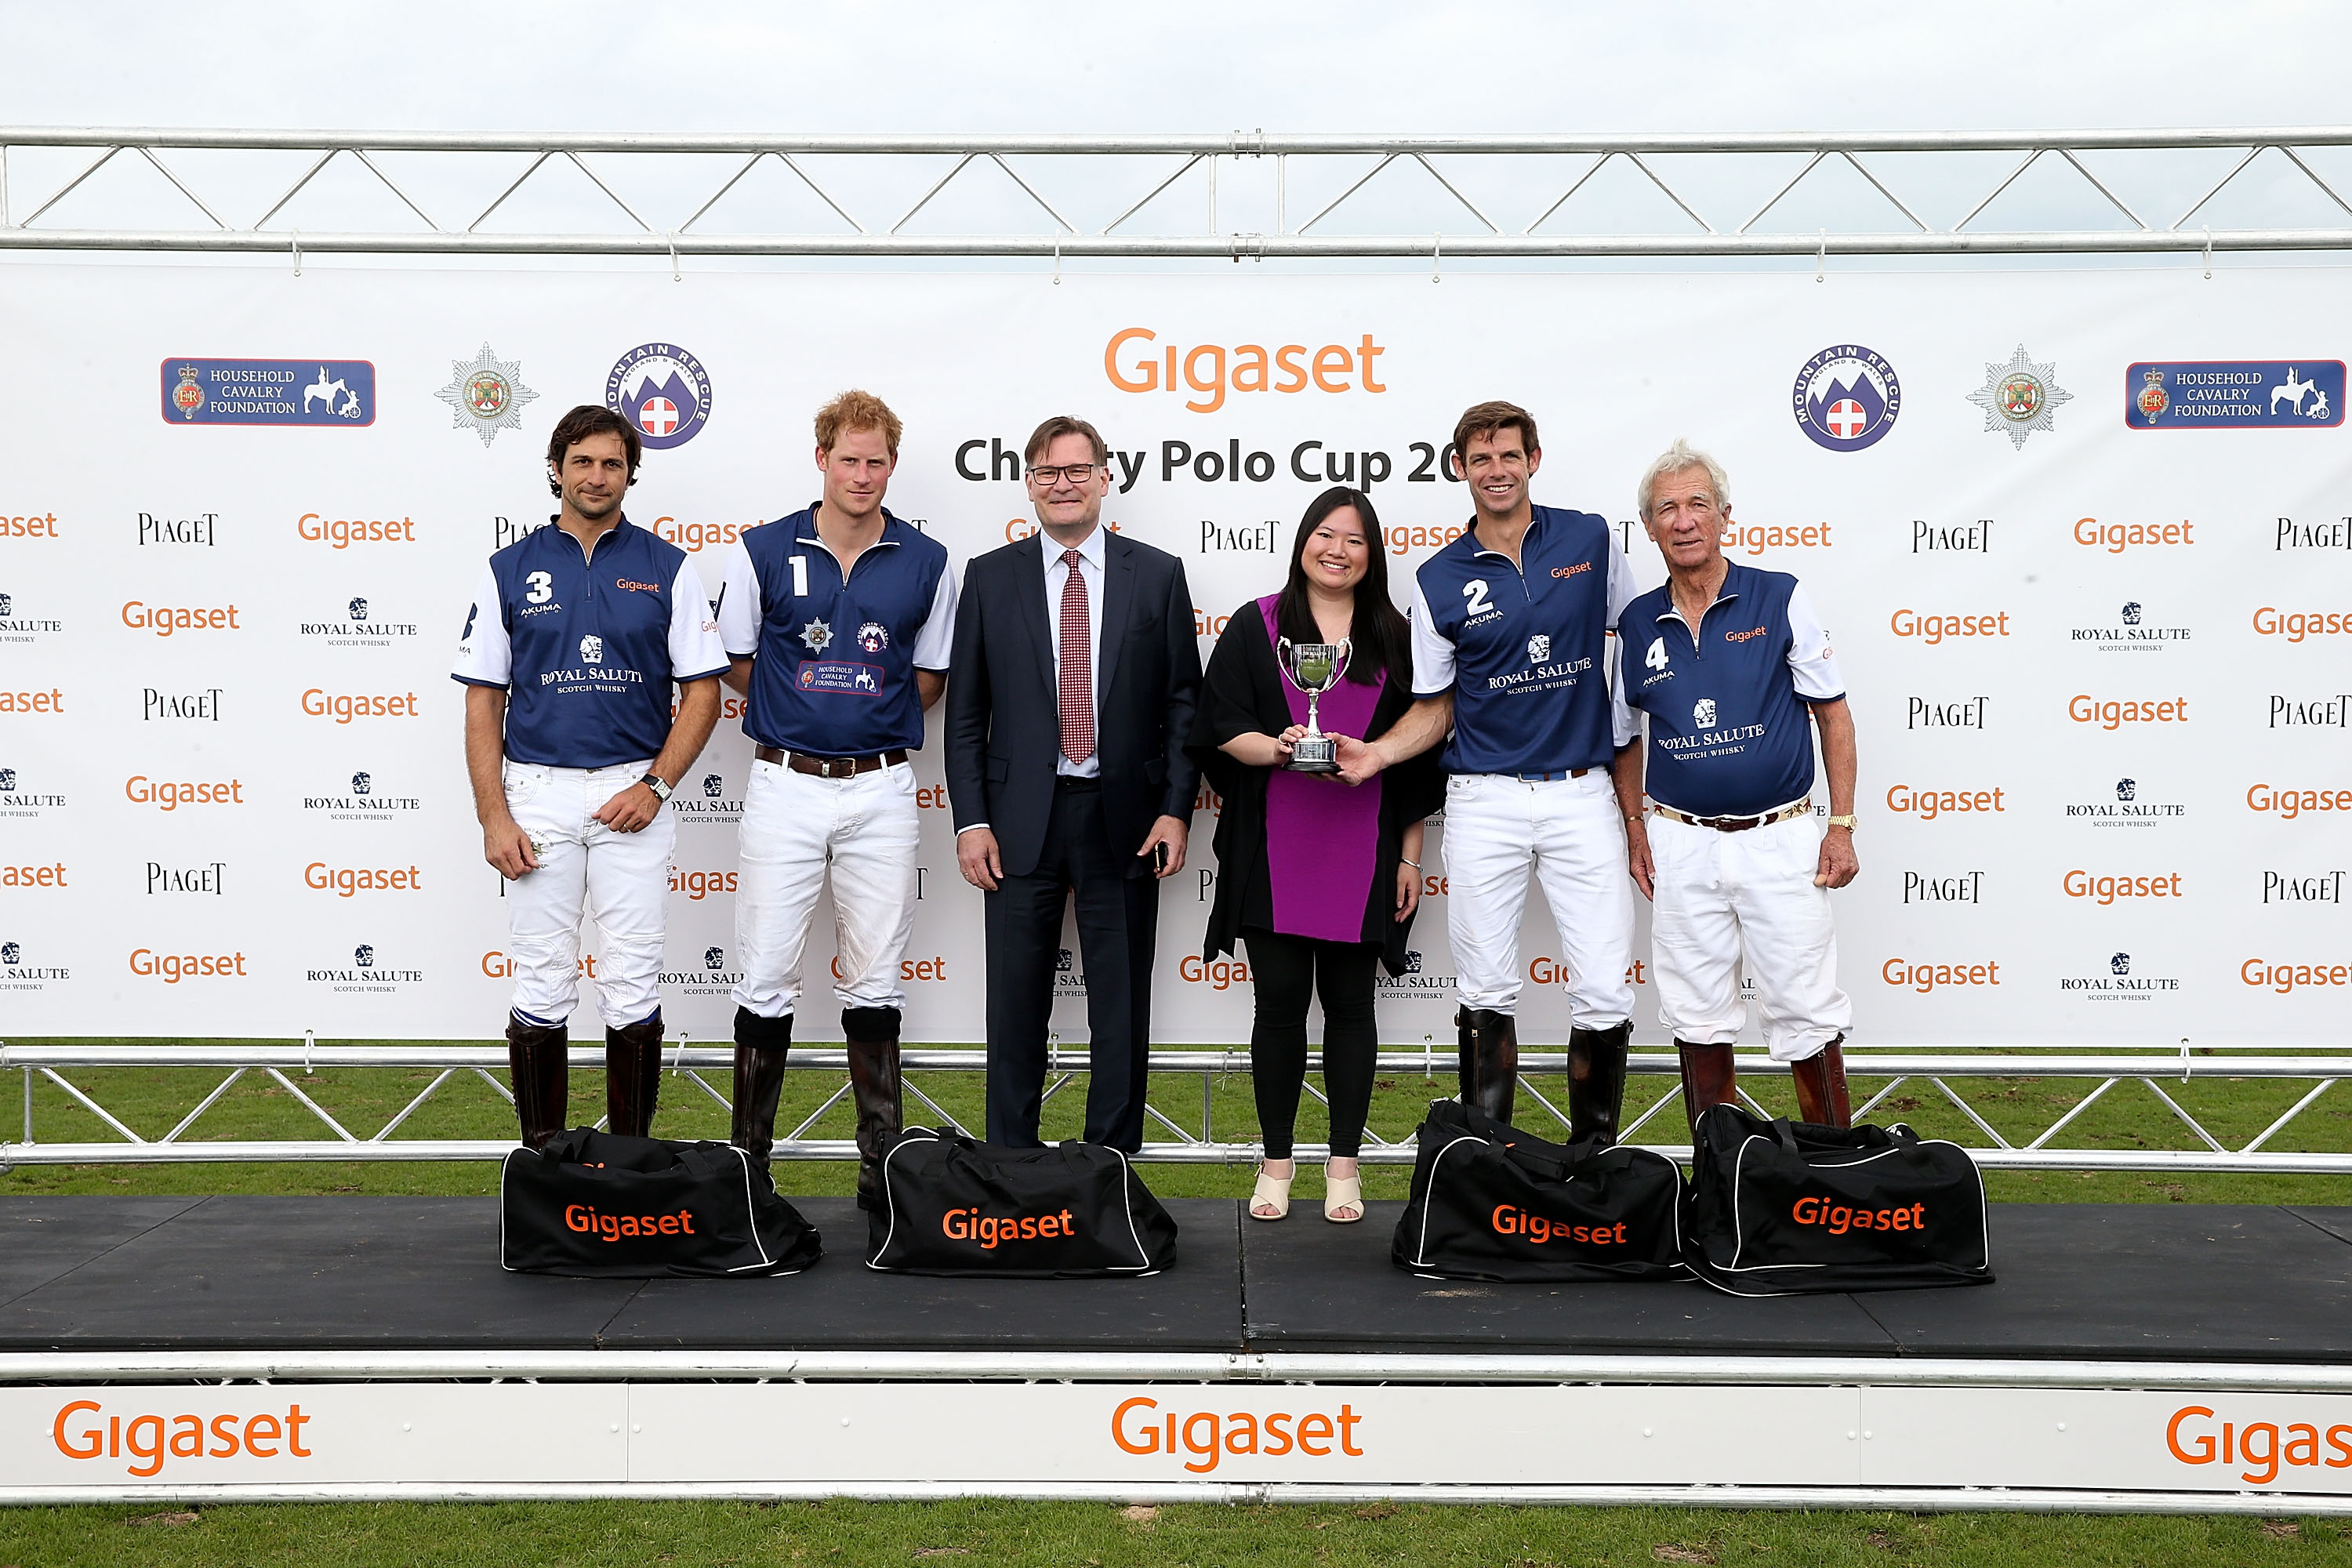 attends the Gigaset Charity Polo Match at Beaufort Polo Club on June 14, 2015 in Tetbury, England.